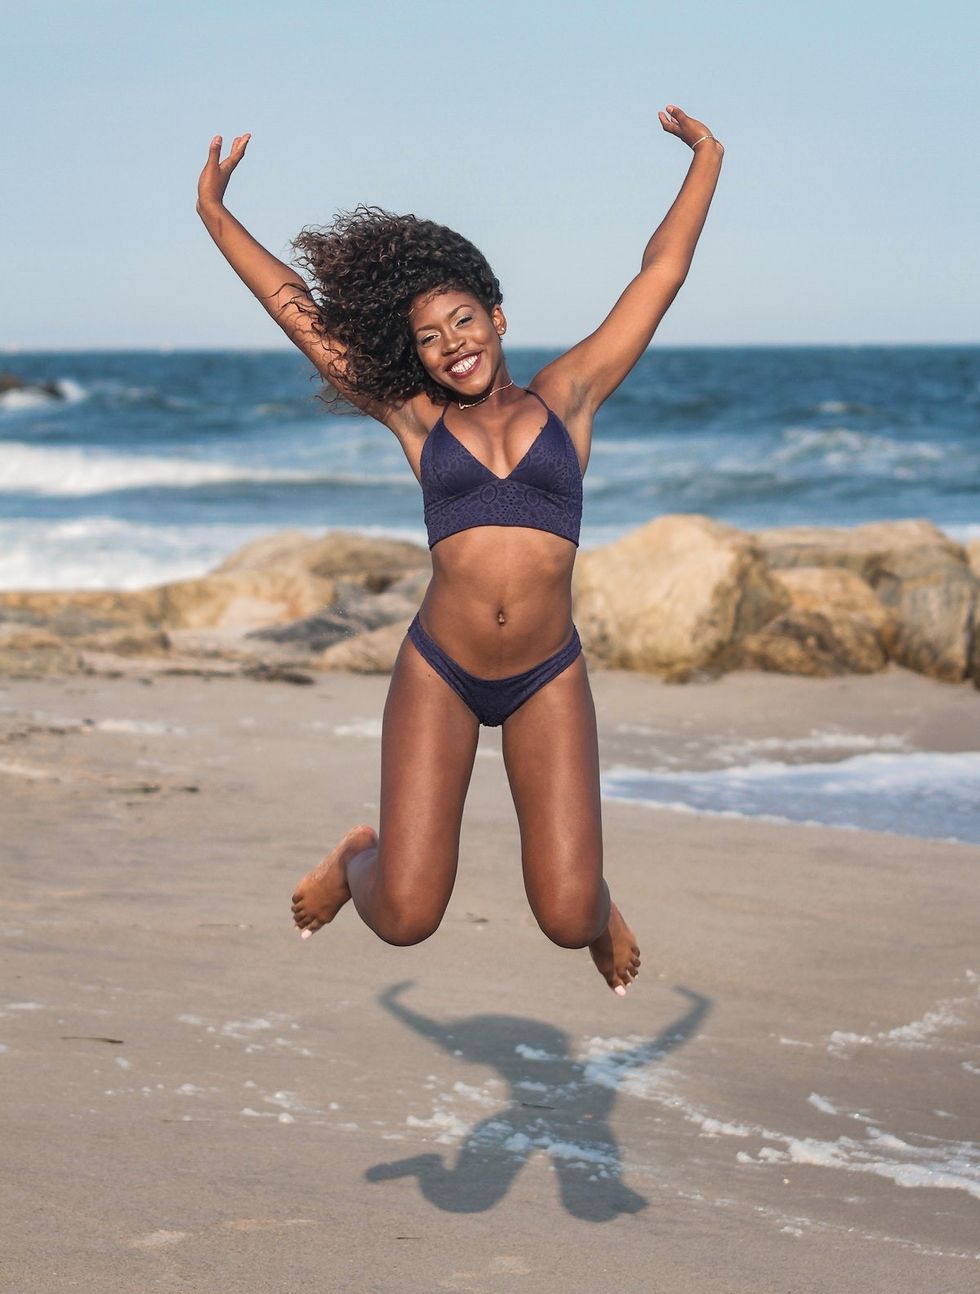 woman on the beach jumping for joy in the air